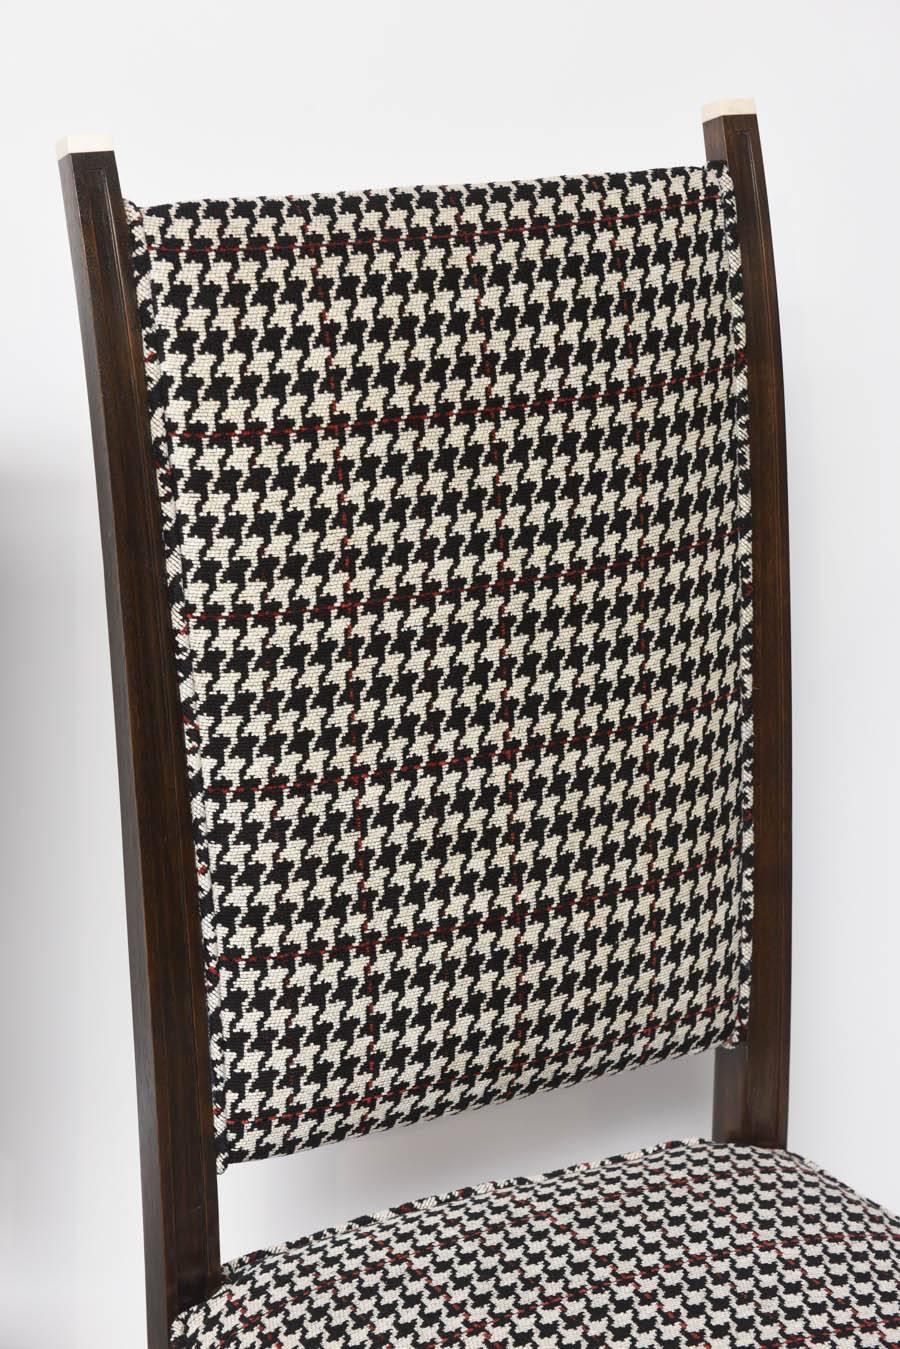 All original vintage pair of chairs with bone detail finials to backrest. Newly upholstered woven wool houndstooth over dark mahogany. Just stunning!

Note: These will ship from our Miami showroom.